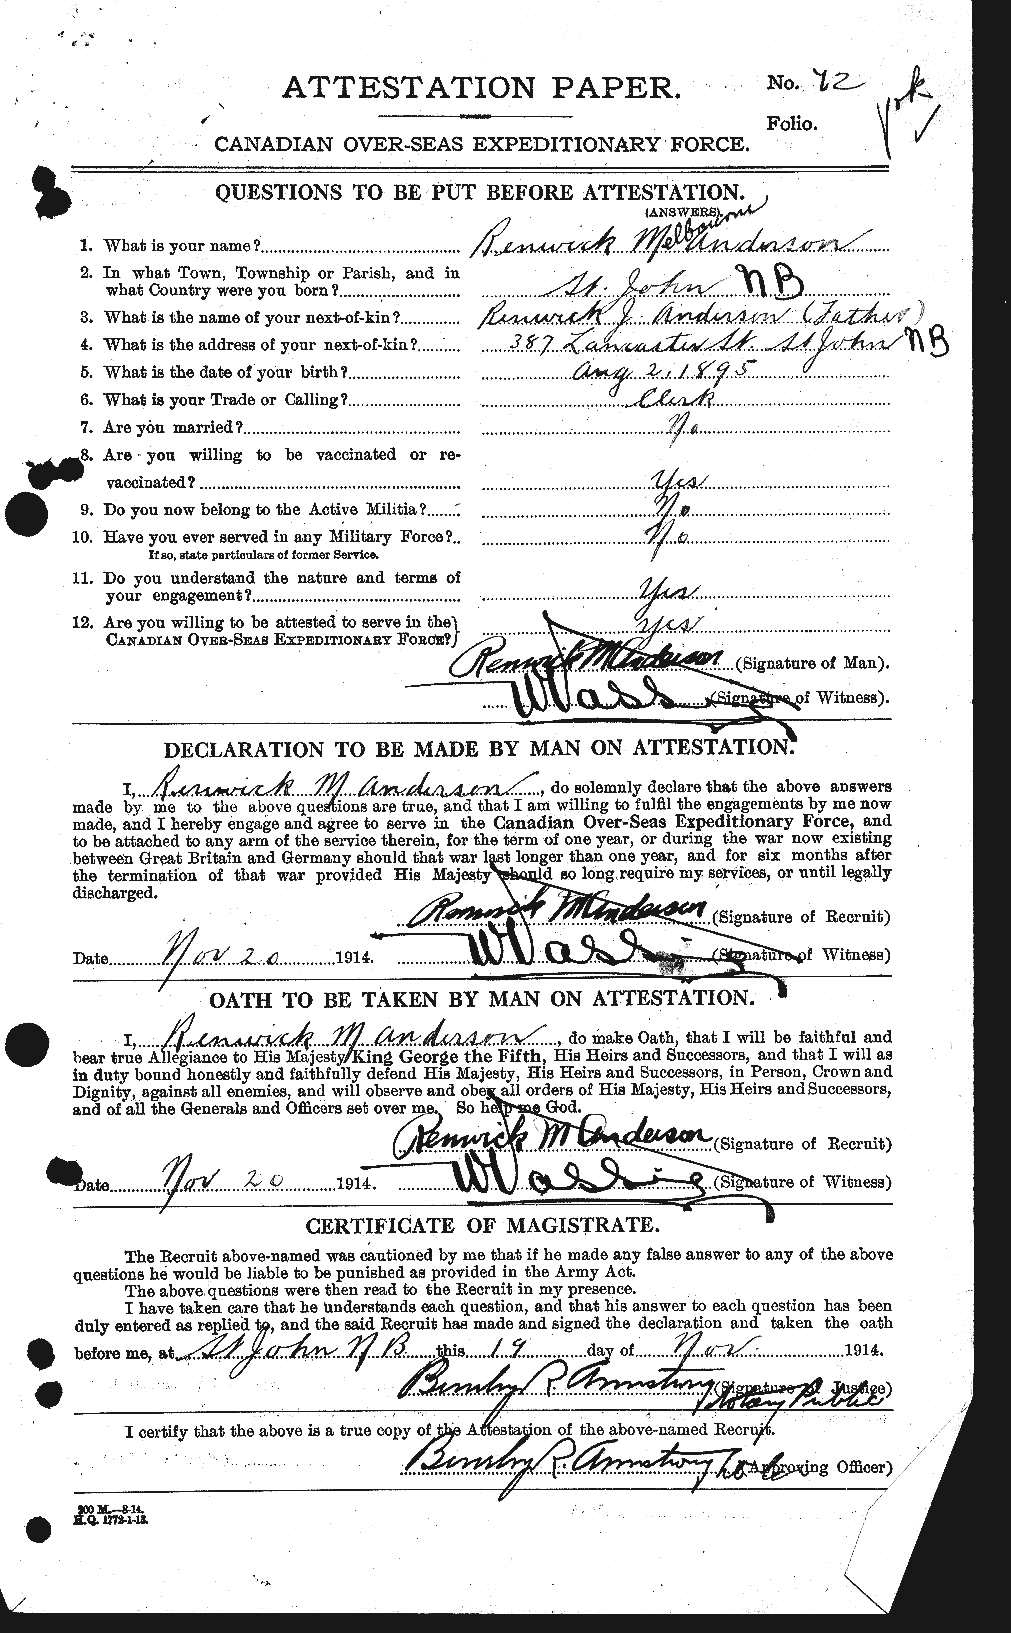 Personnel Records of the First World War - CEF 207324a